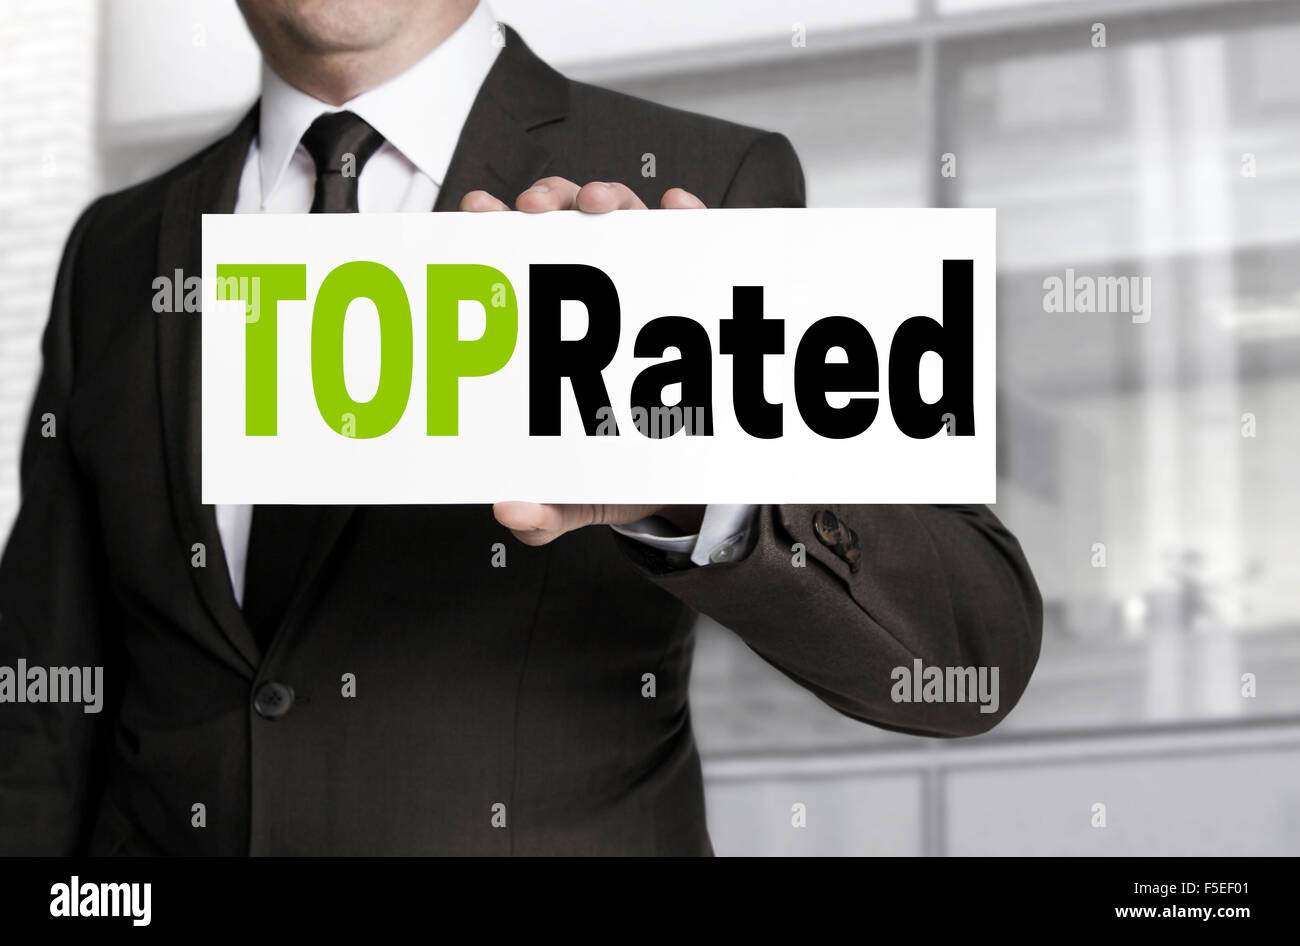 Top Rated sign is held by businessman concept. Stock Photo